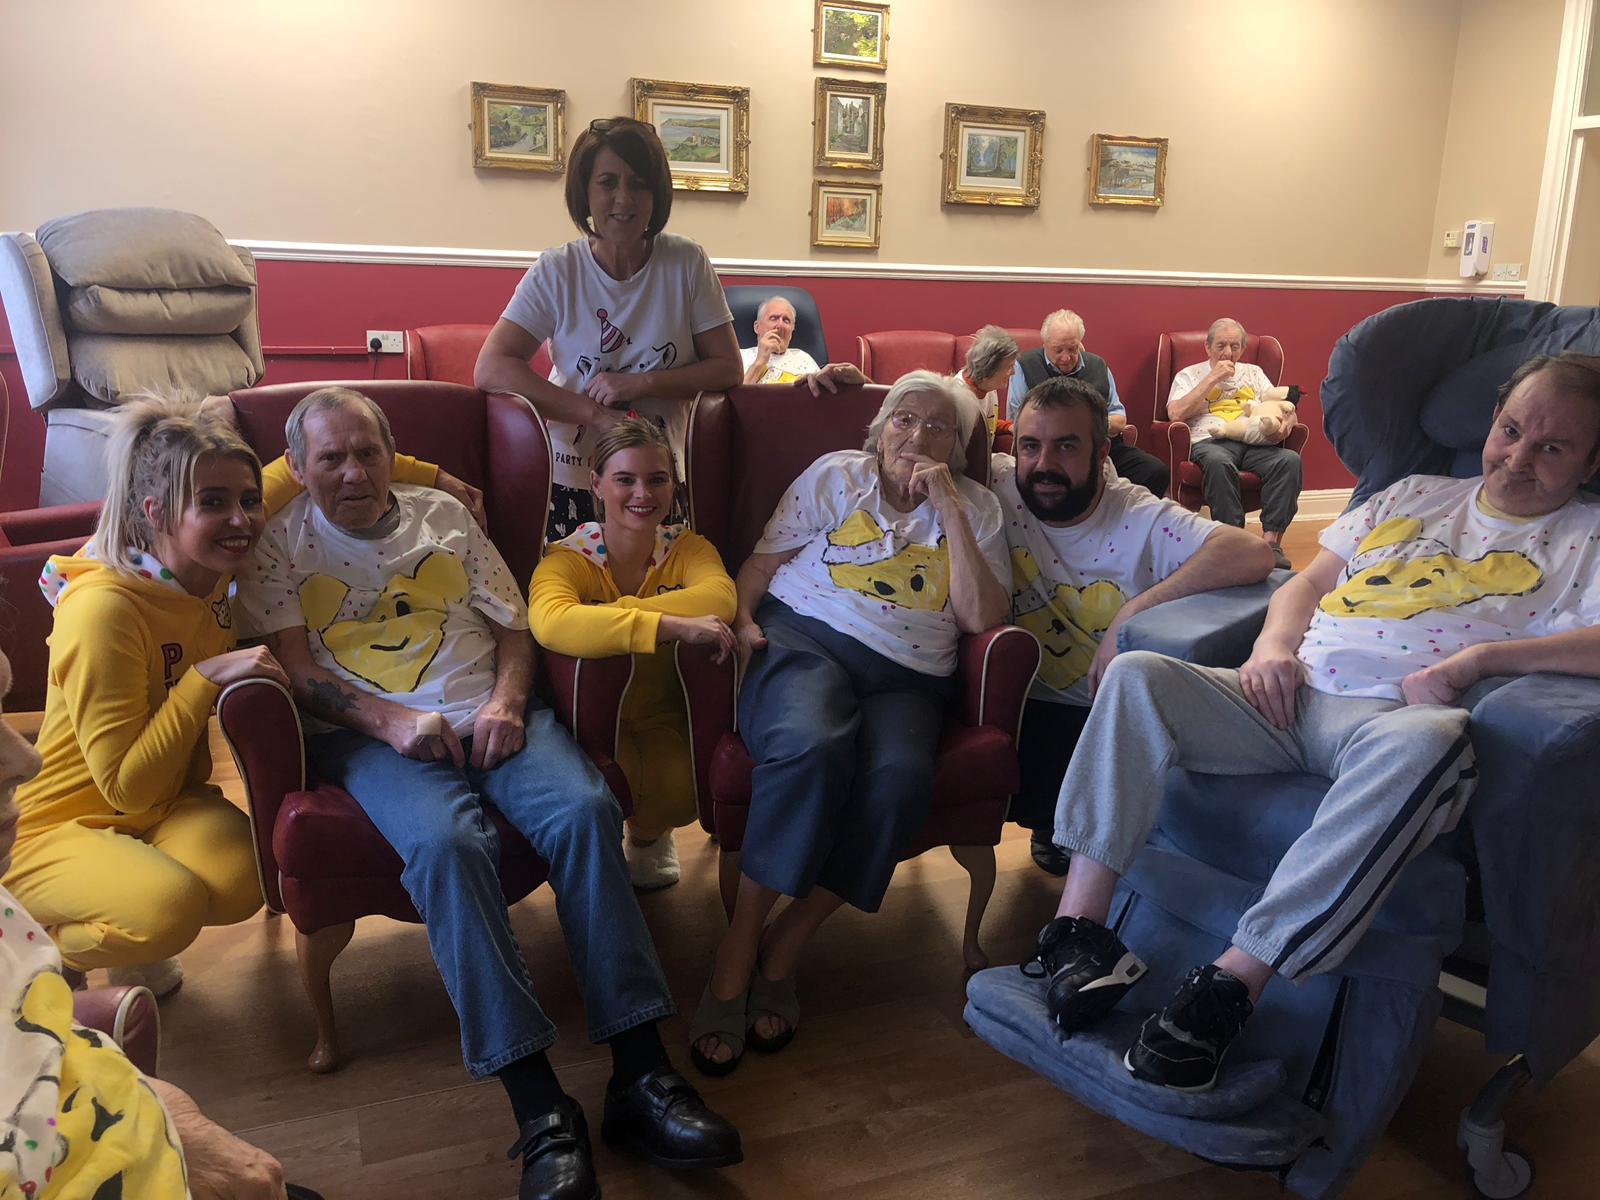 Children In Need 6: Key Healthcare is dedicated to caring for elderly residents in safe. We have multiple dementia care homes including our care home middlesbrough, our care home St. Helen and care home saltburn. We excel in monitoring and improving care levels.